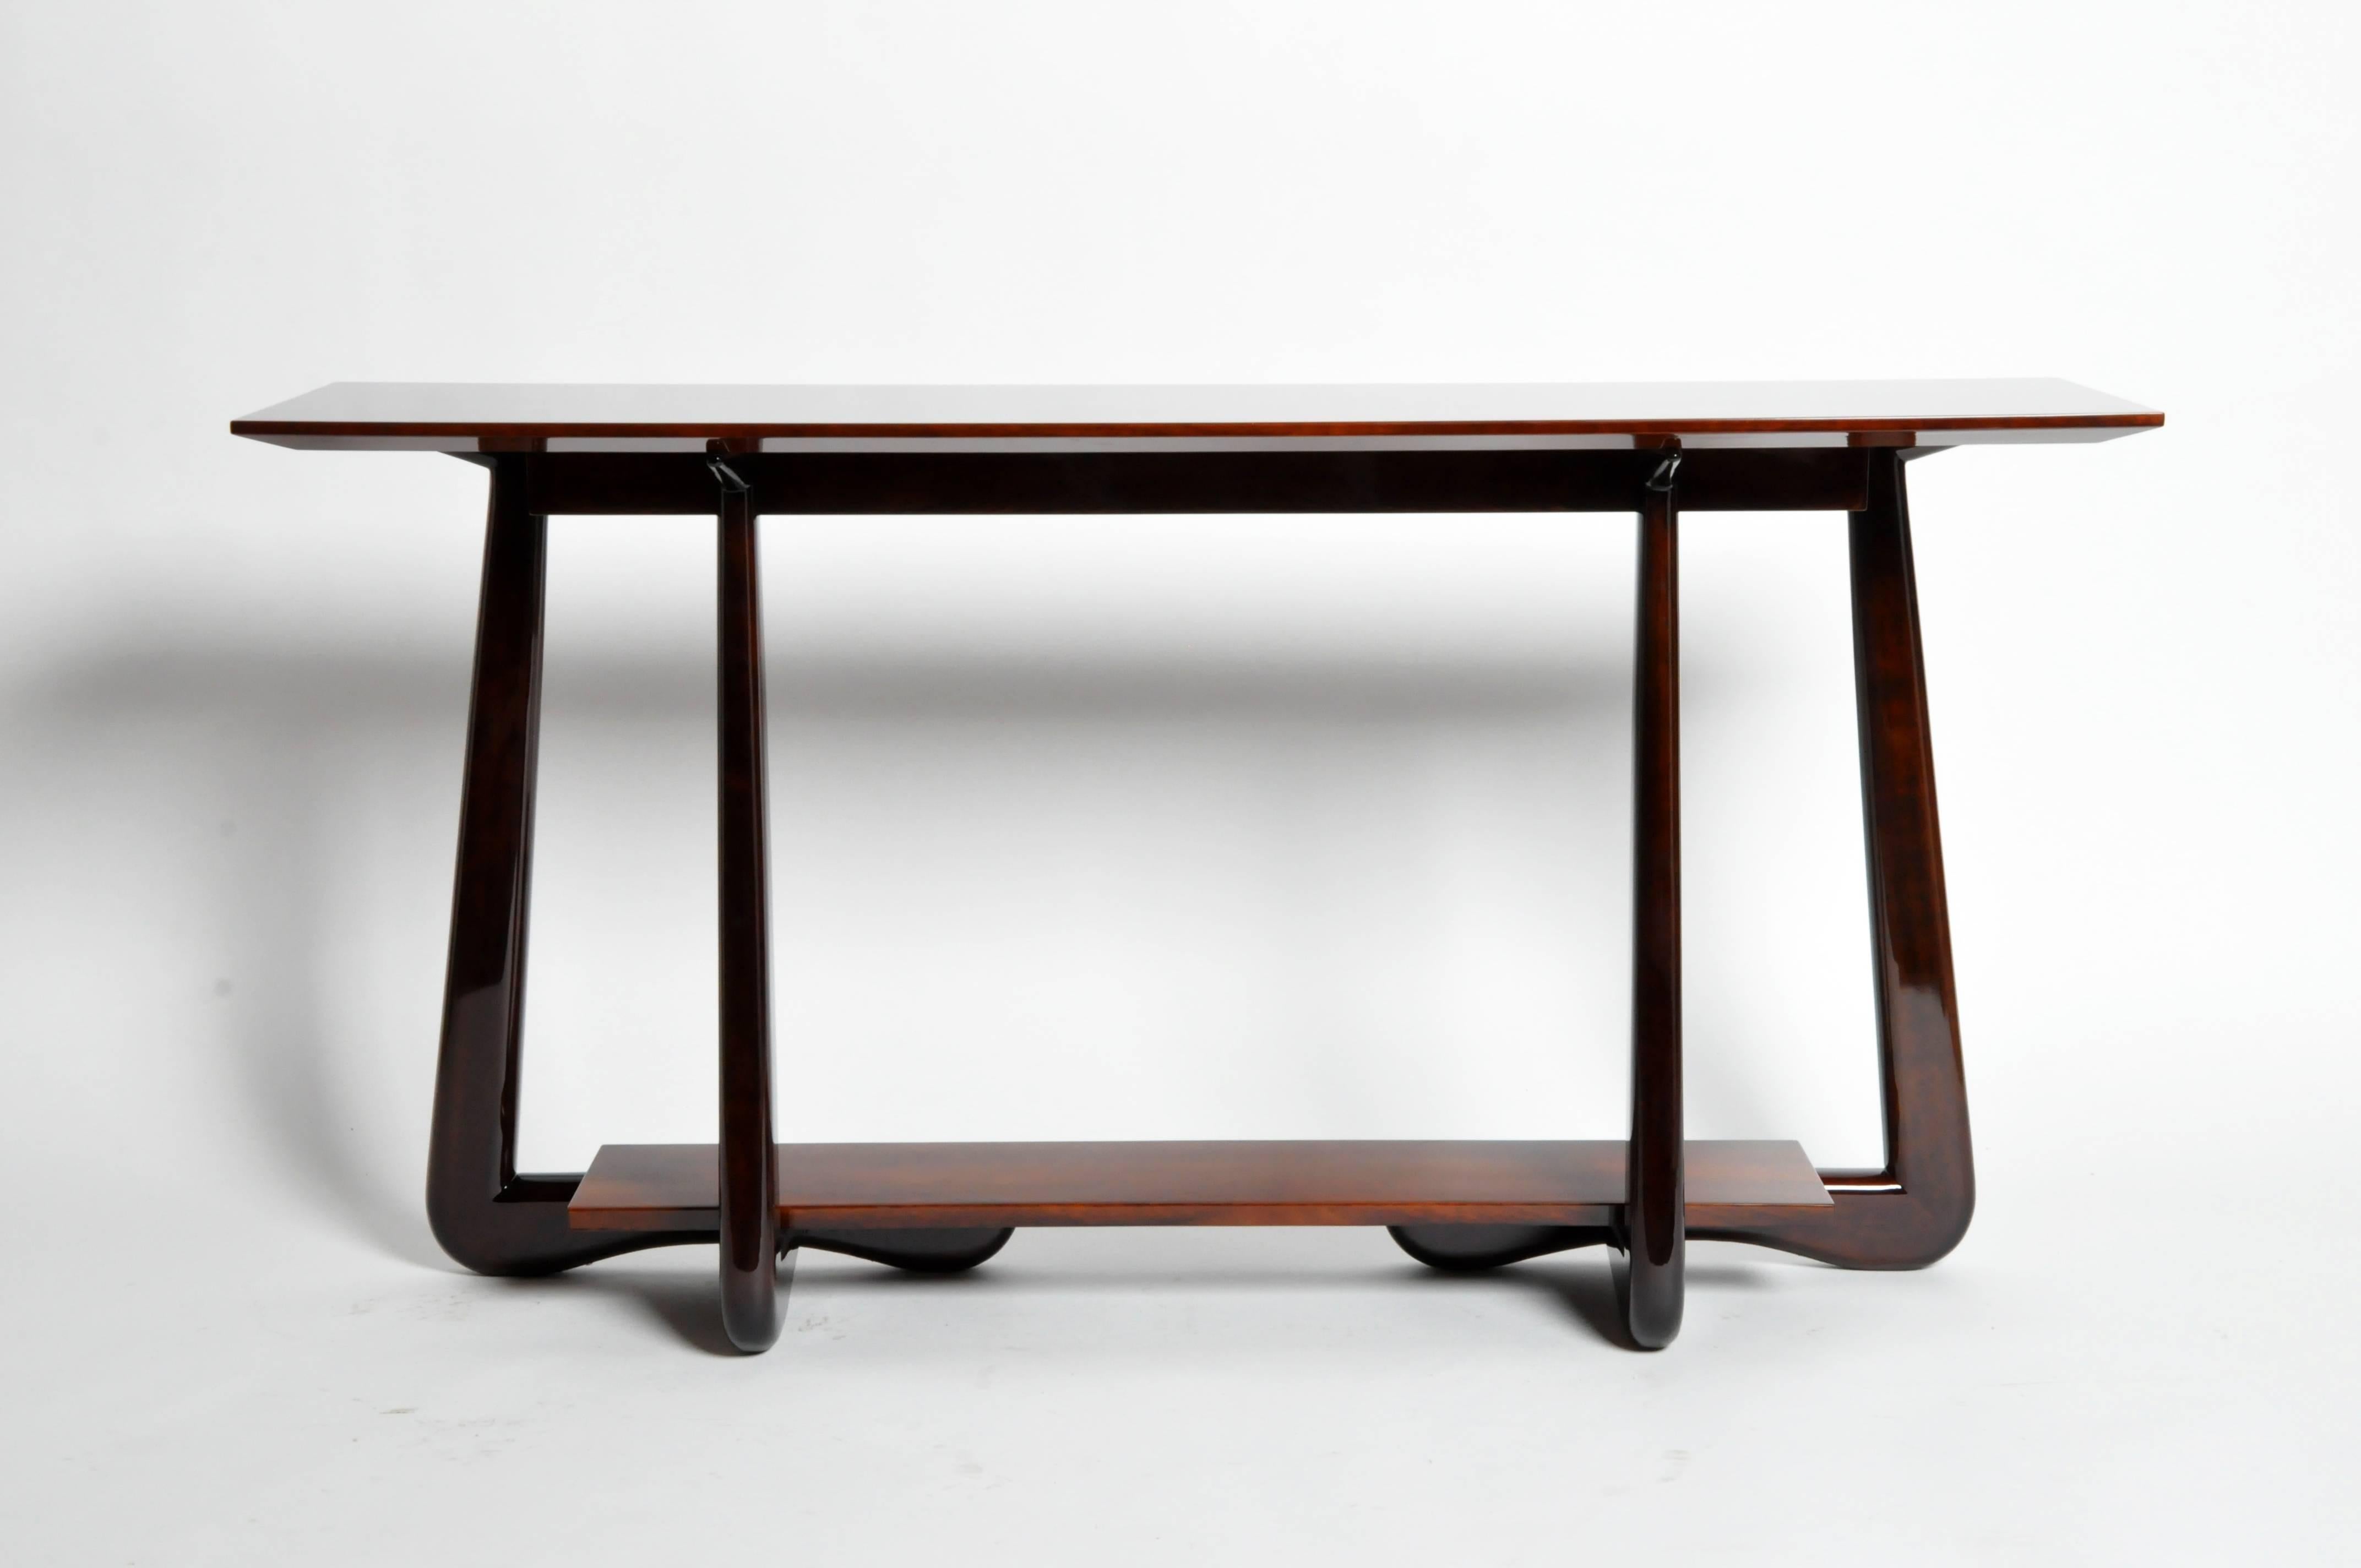 A rich vocabulary of Mid-Century design is evoked in this 1950s, French style console with walnut veneer. Beautiful combination of organic shapes and clean, simple lines.